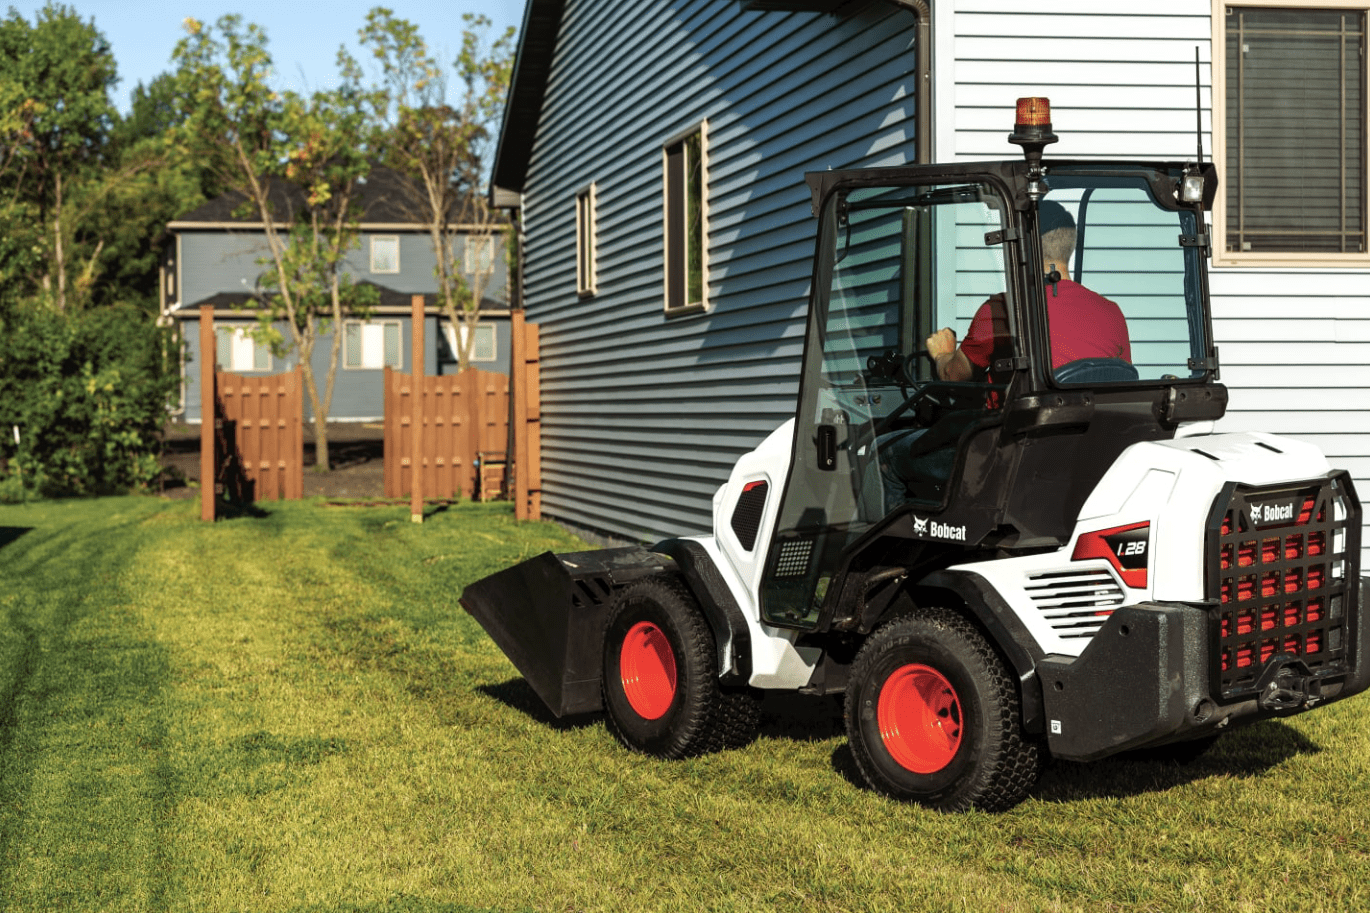 Browse Specs and more for the Bobcat L28 Small Articulated Loader - Bobcat of Indy